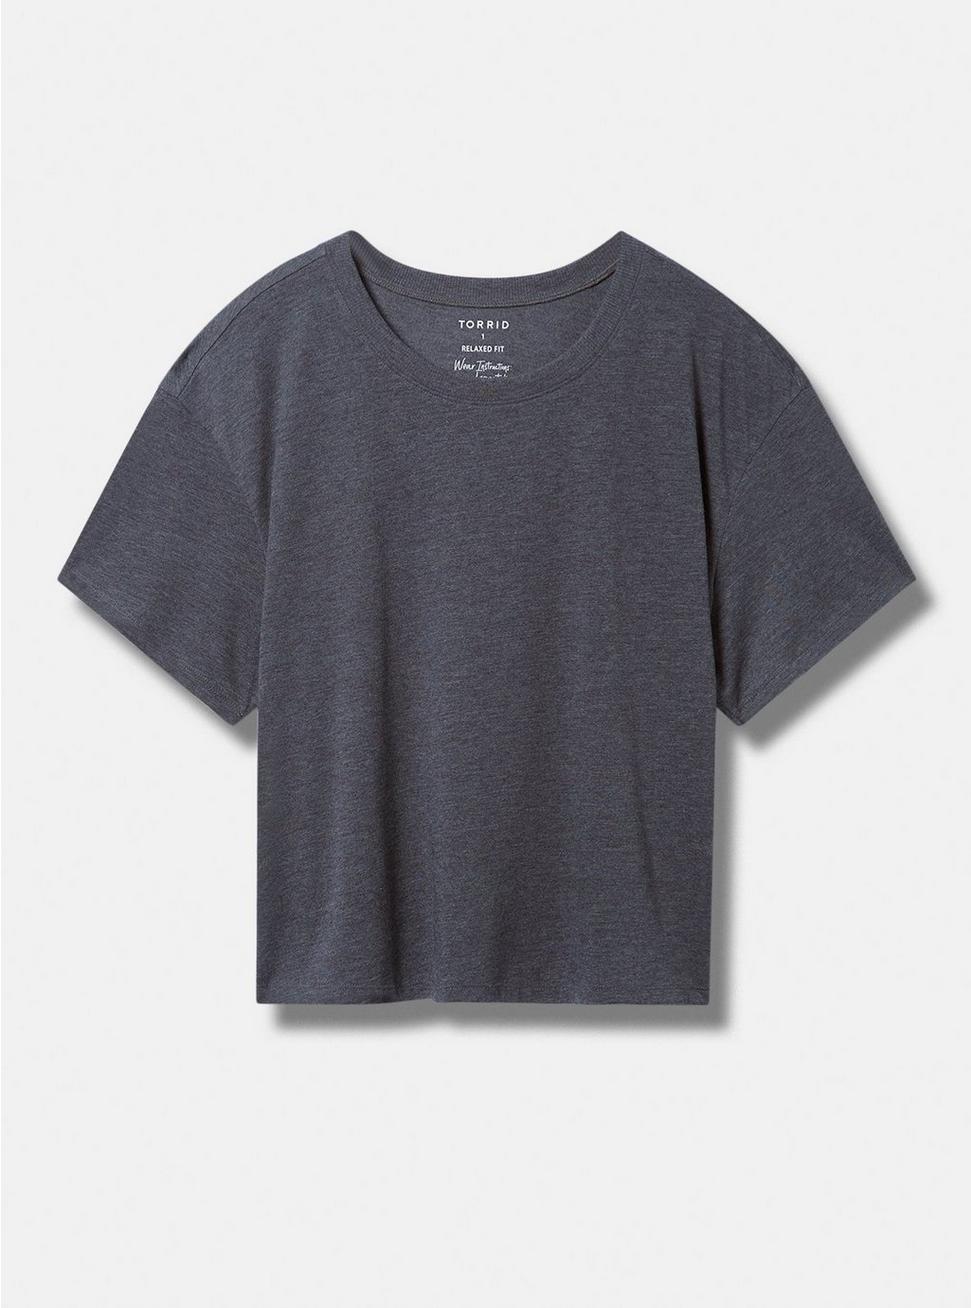 Relaxed Signature Jersey Crew Neck Crop Tee, CHARCOAL GREY, hi-res